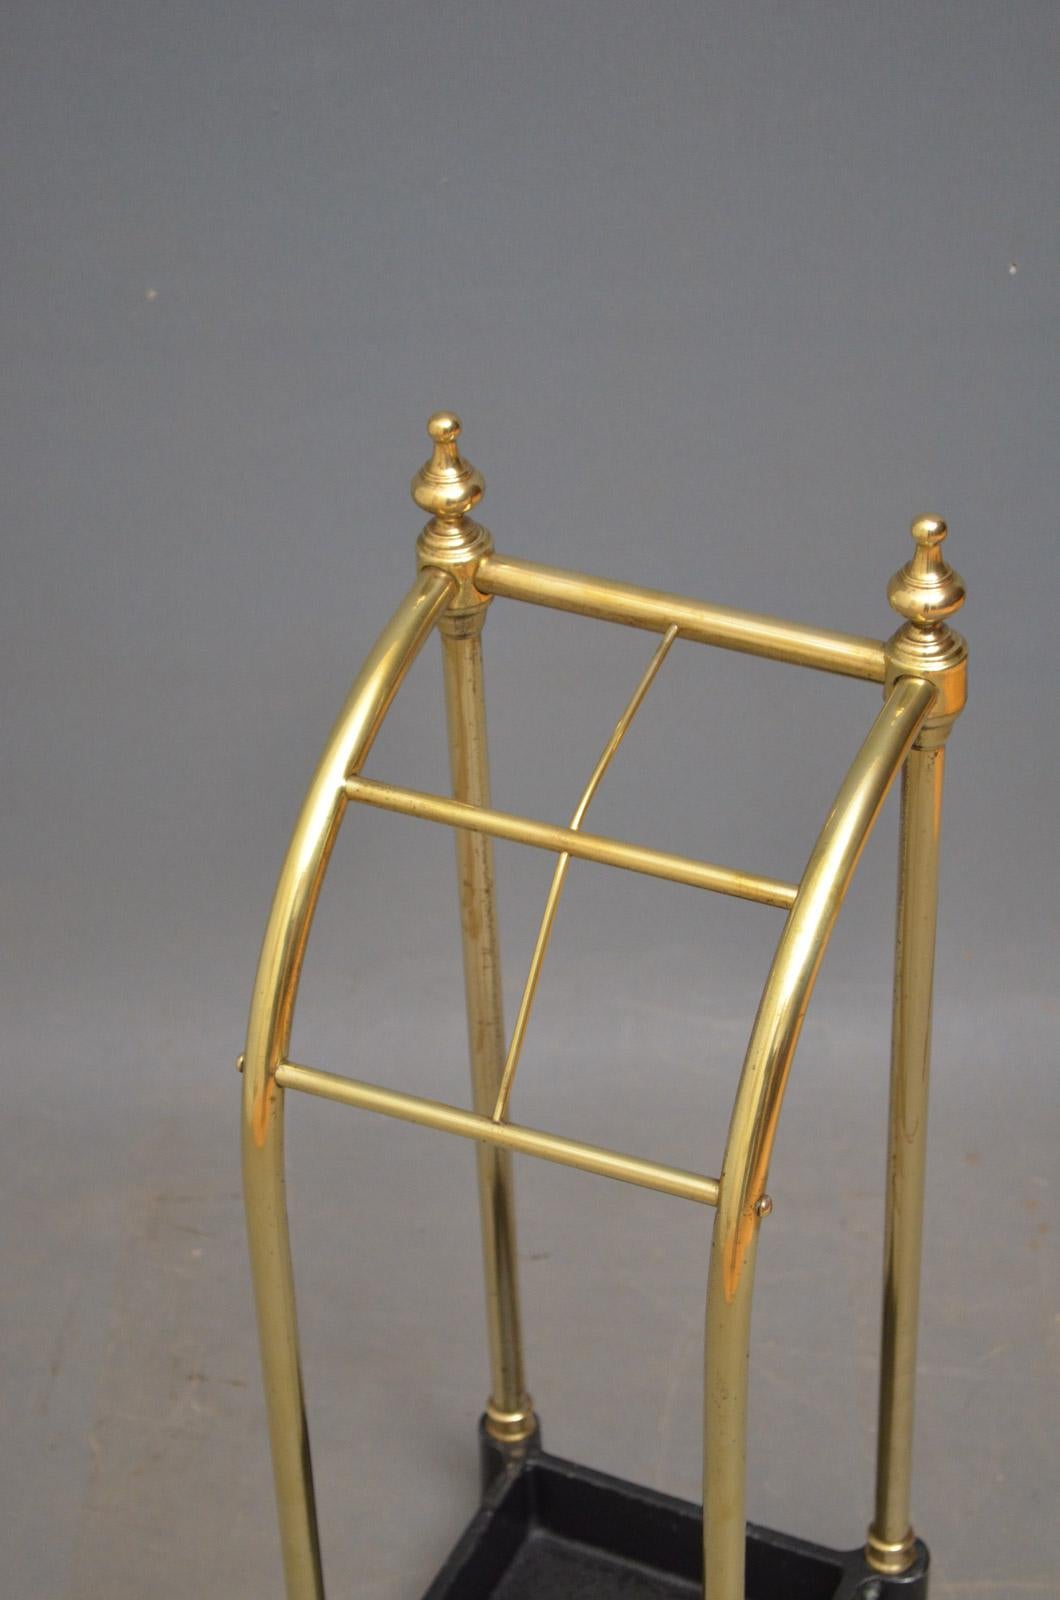 Sn4469 A Victorian brass umbrella stand / stick stand, having 4 sections for umbrellas and walking sticks, all in fantastic condition throughout, ready to place at home, circa 1880
Measures: H 24